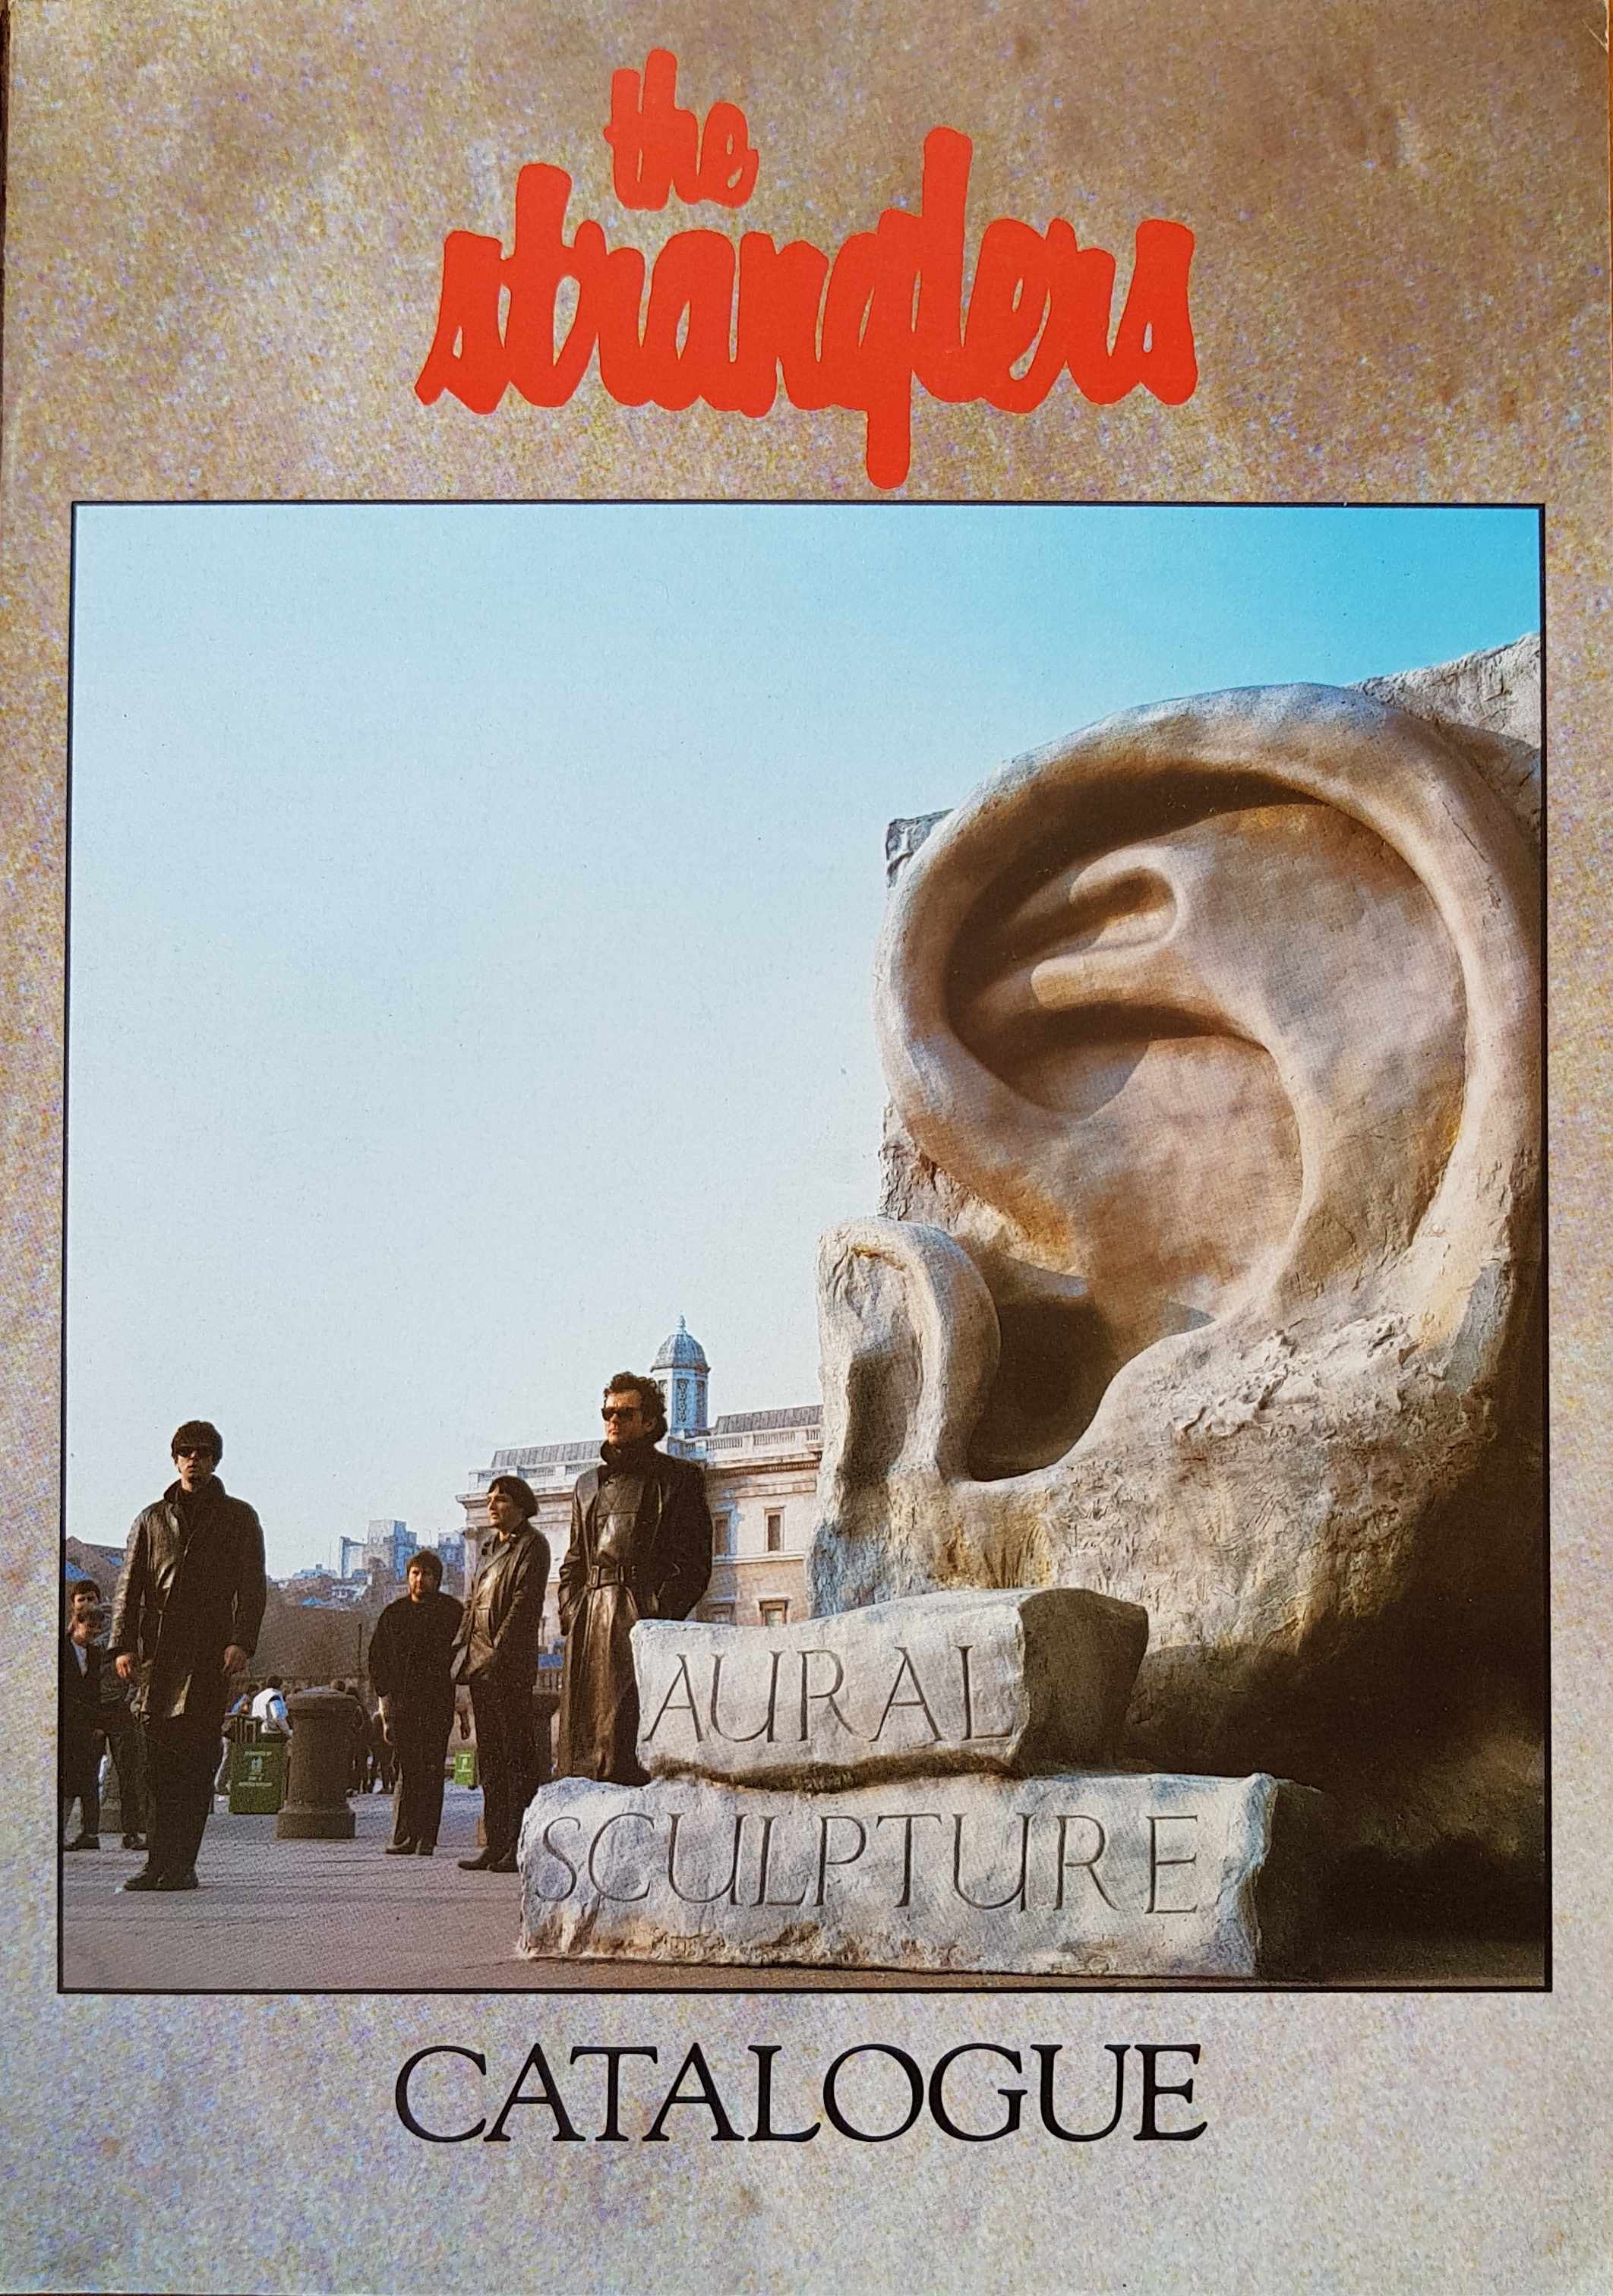 Picture of Books-ASCAT Aural sculpture catalogue by artist The Stranglers  from The Stranglers